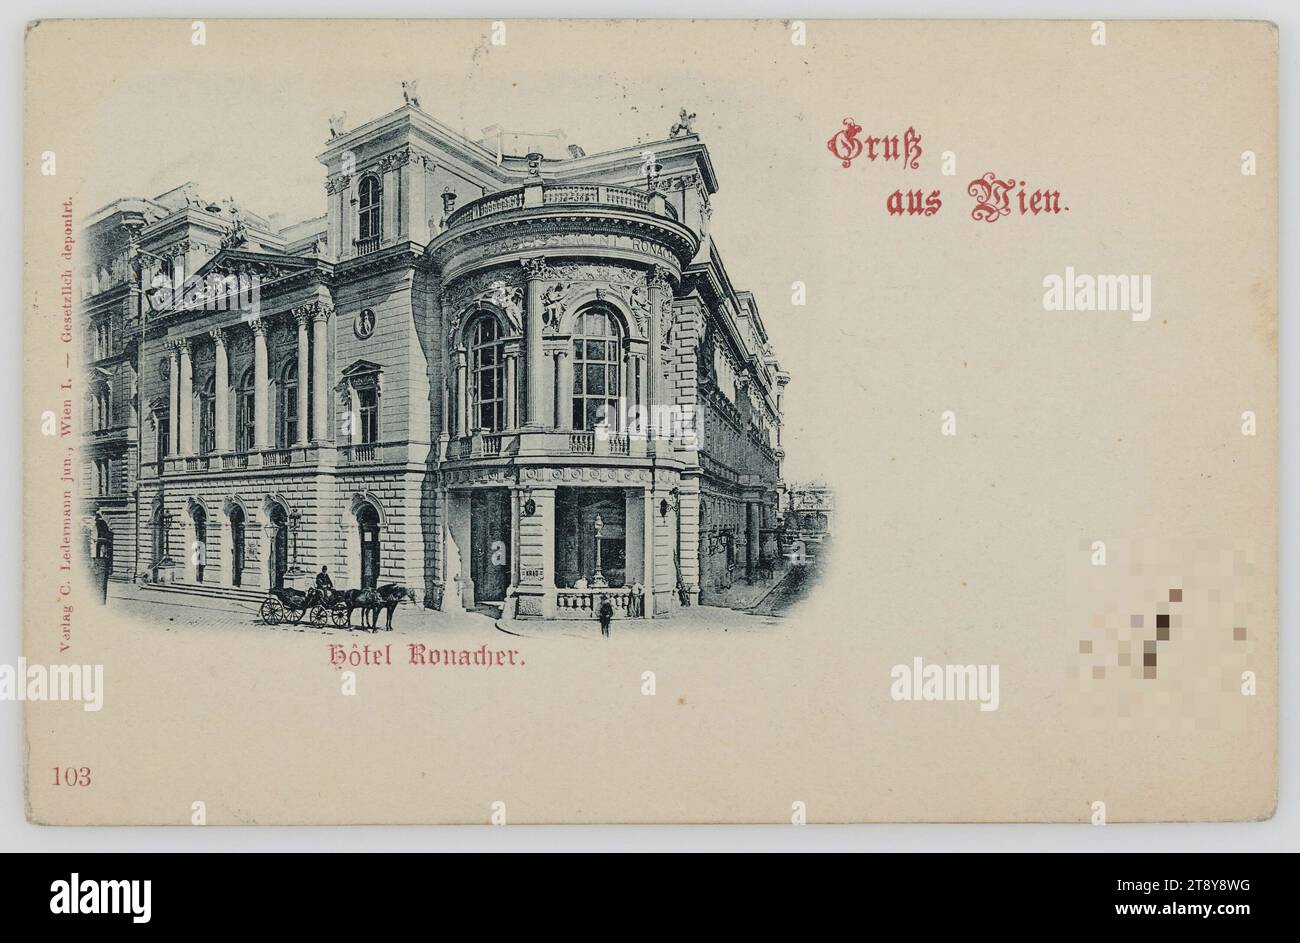 1st, Seilerstätte 9 - Hotel Ronacher, picture postcard, Carl (Karl) Ledermann Jr, producer, 1898, cardboard, collotype, theater, 1st district: inner city, theater (building), four-wheeled vehicle pulled by animals, ex: Droschke, carriage, wagon, with people, Ronacher, Seilerstätte., The Vienna Collection Stock Photo